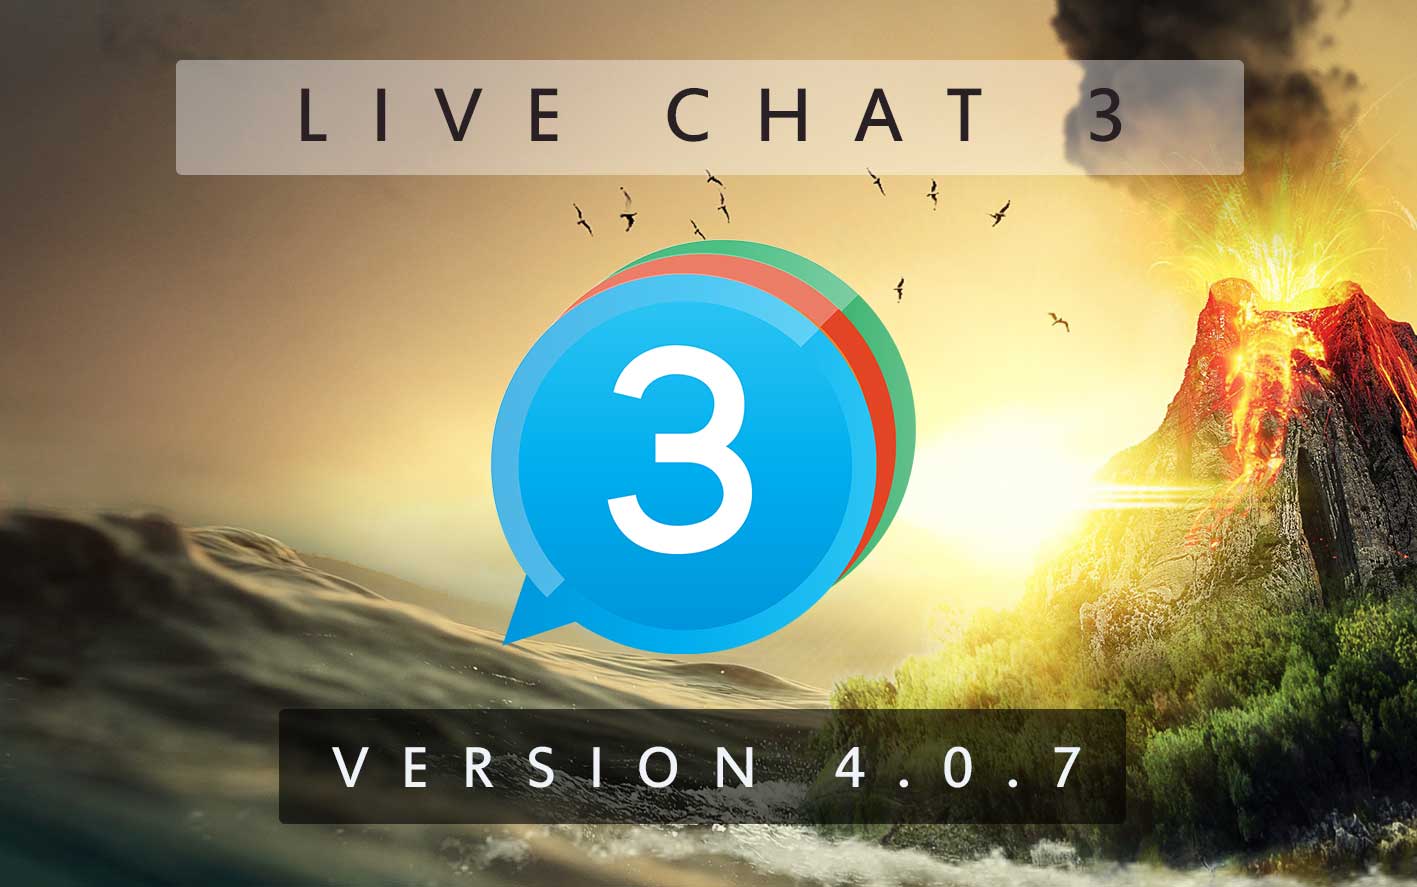 Live Chat 3 - Version 4.0.7